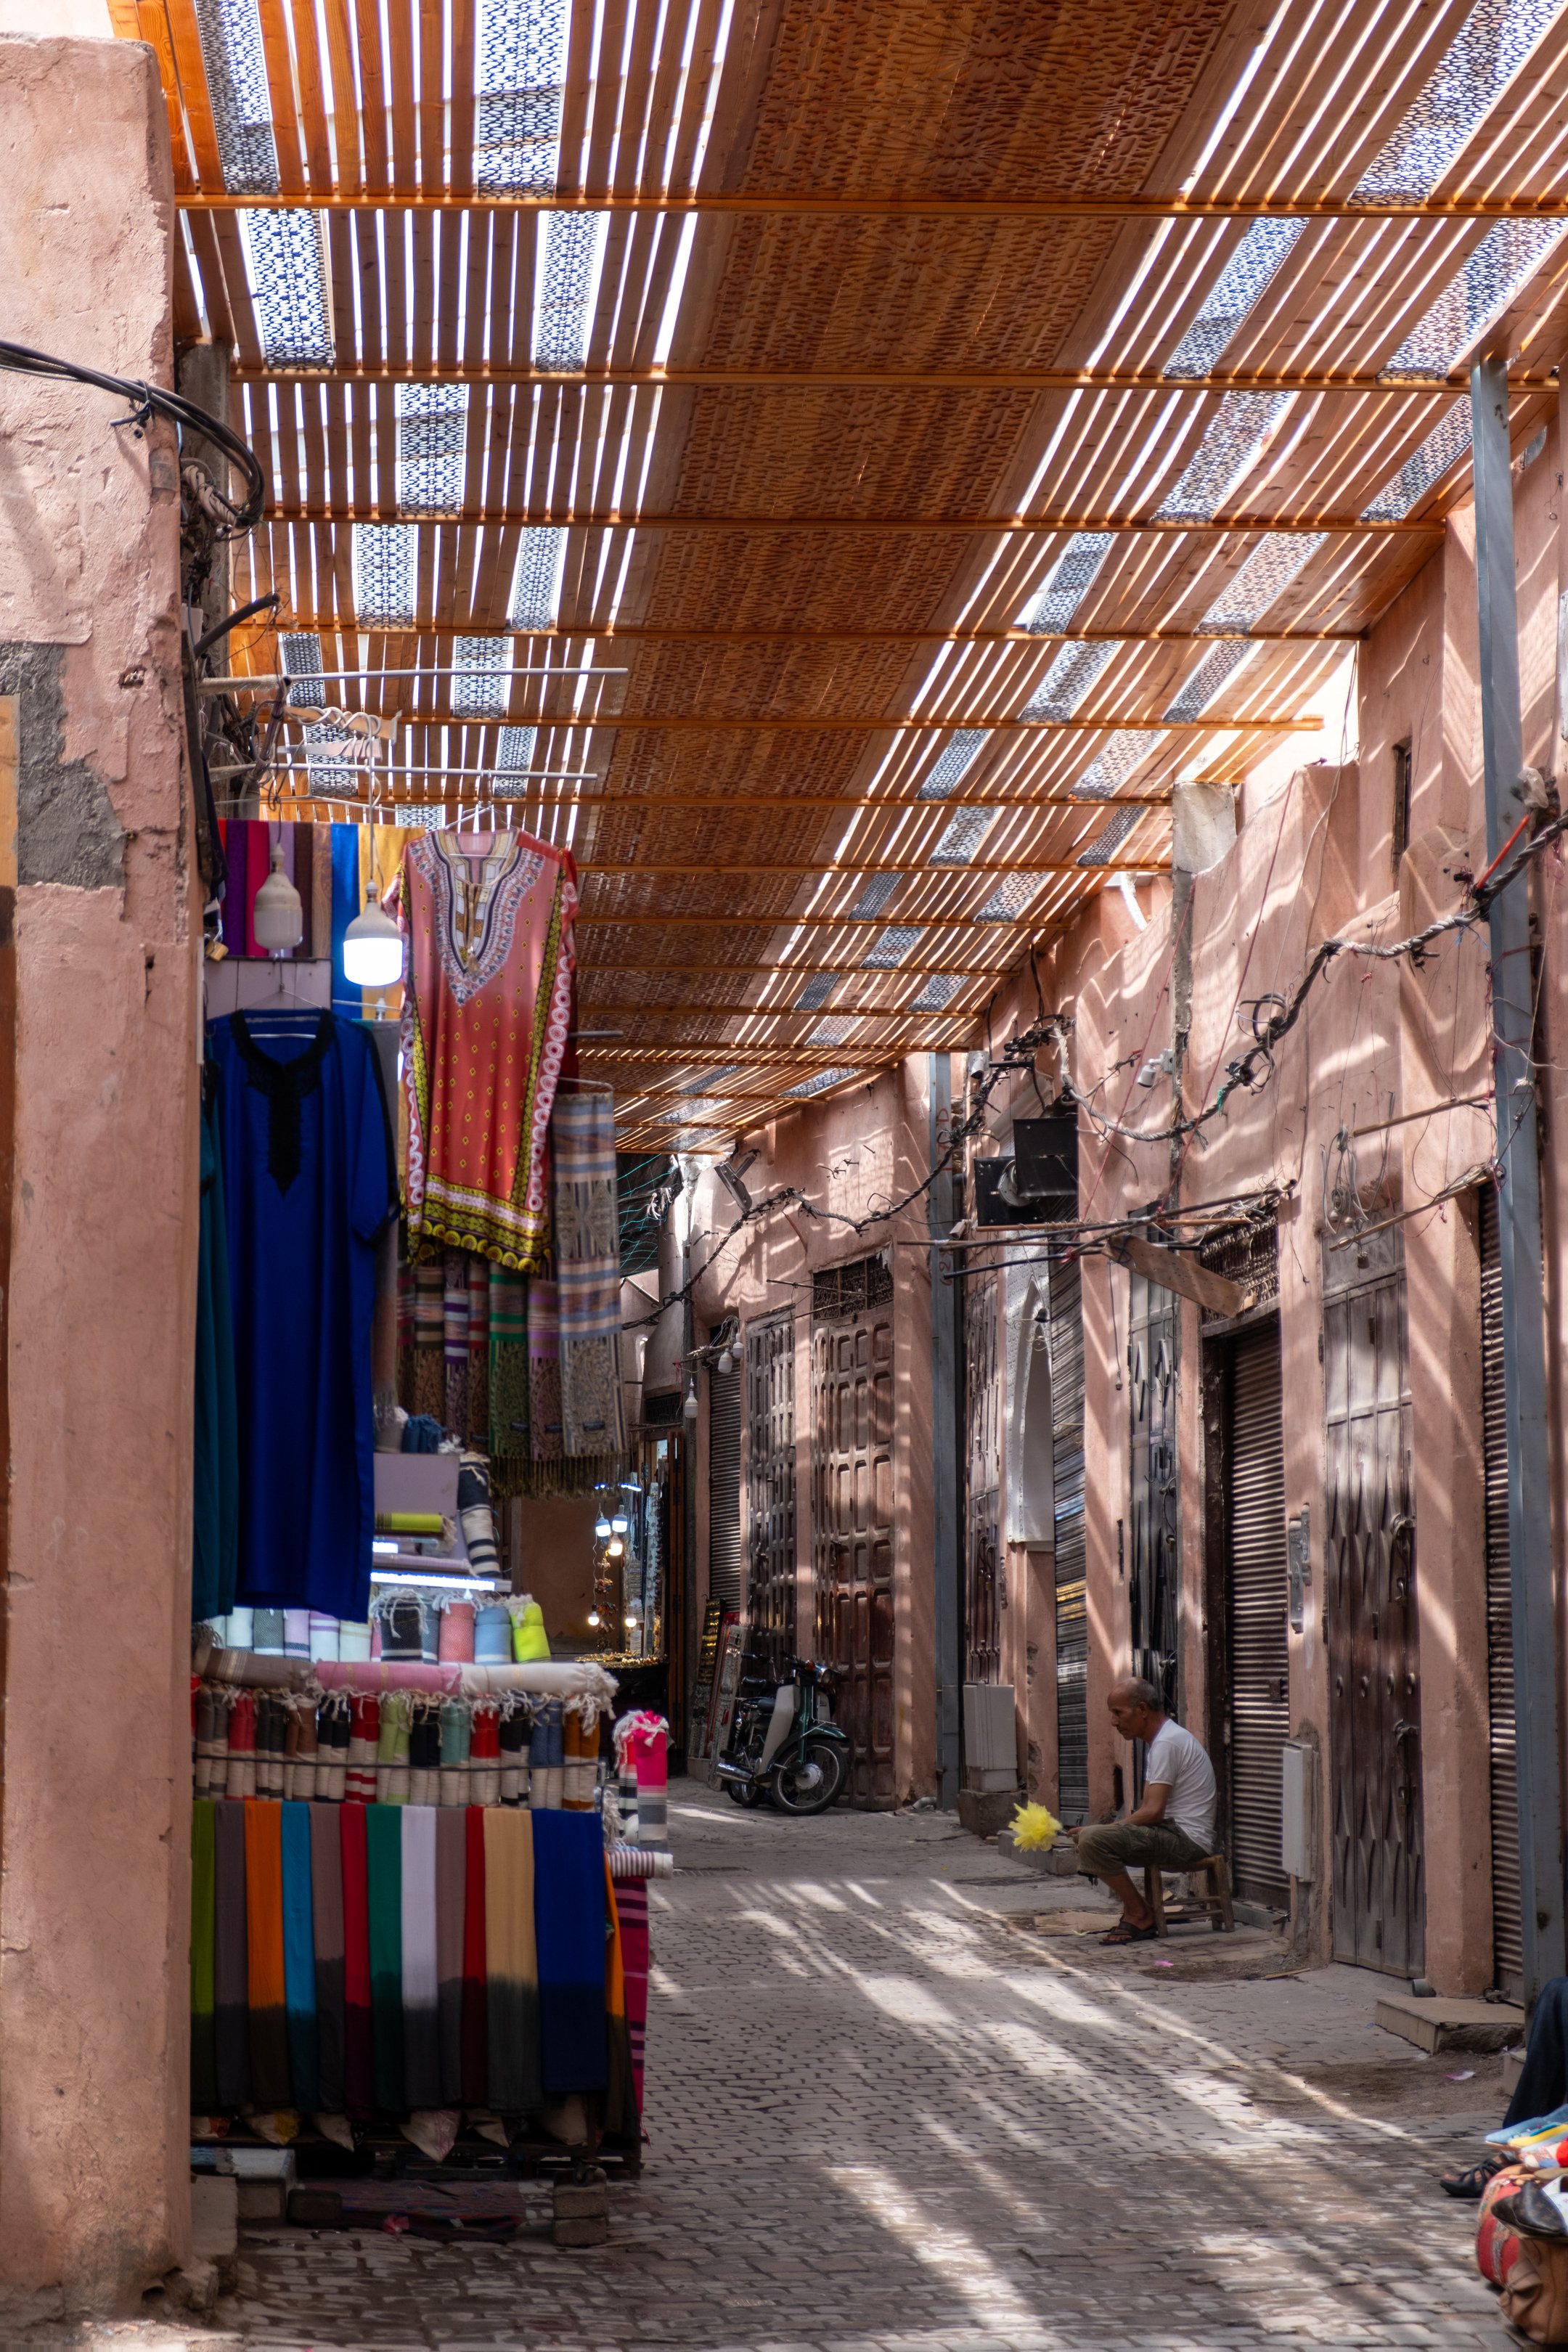 View down a nearly empty passage in the Medina